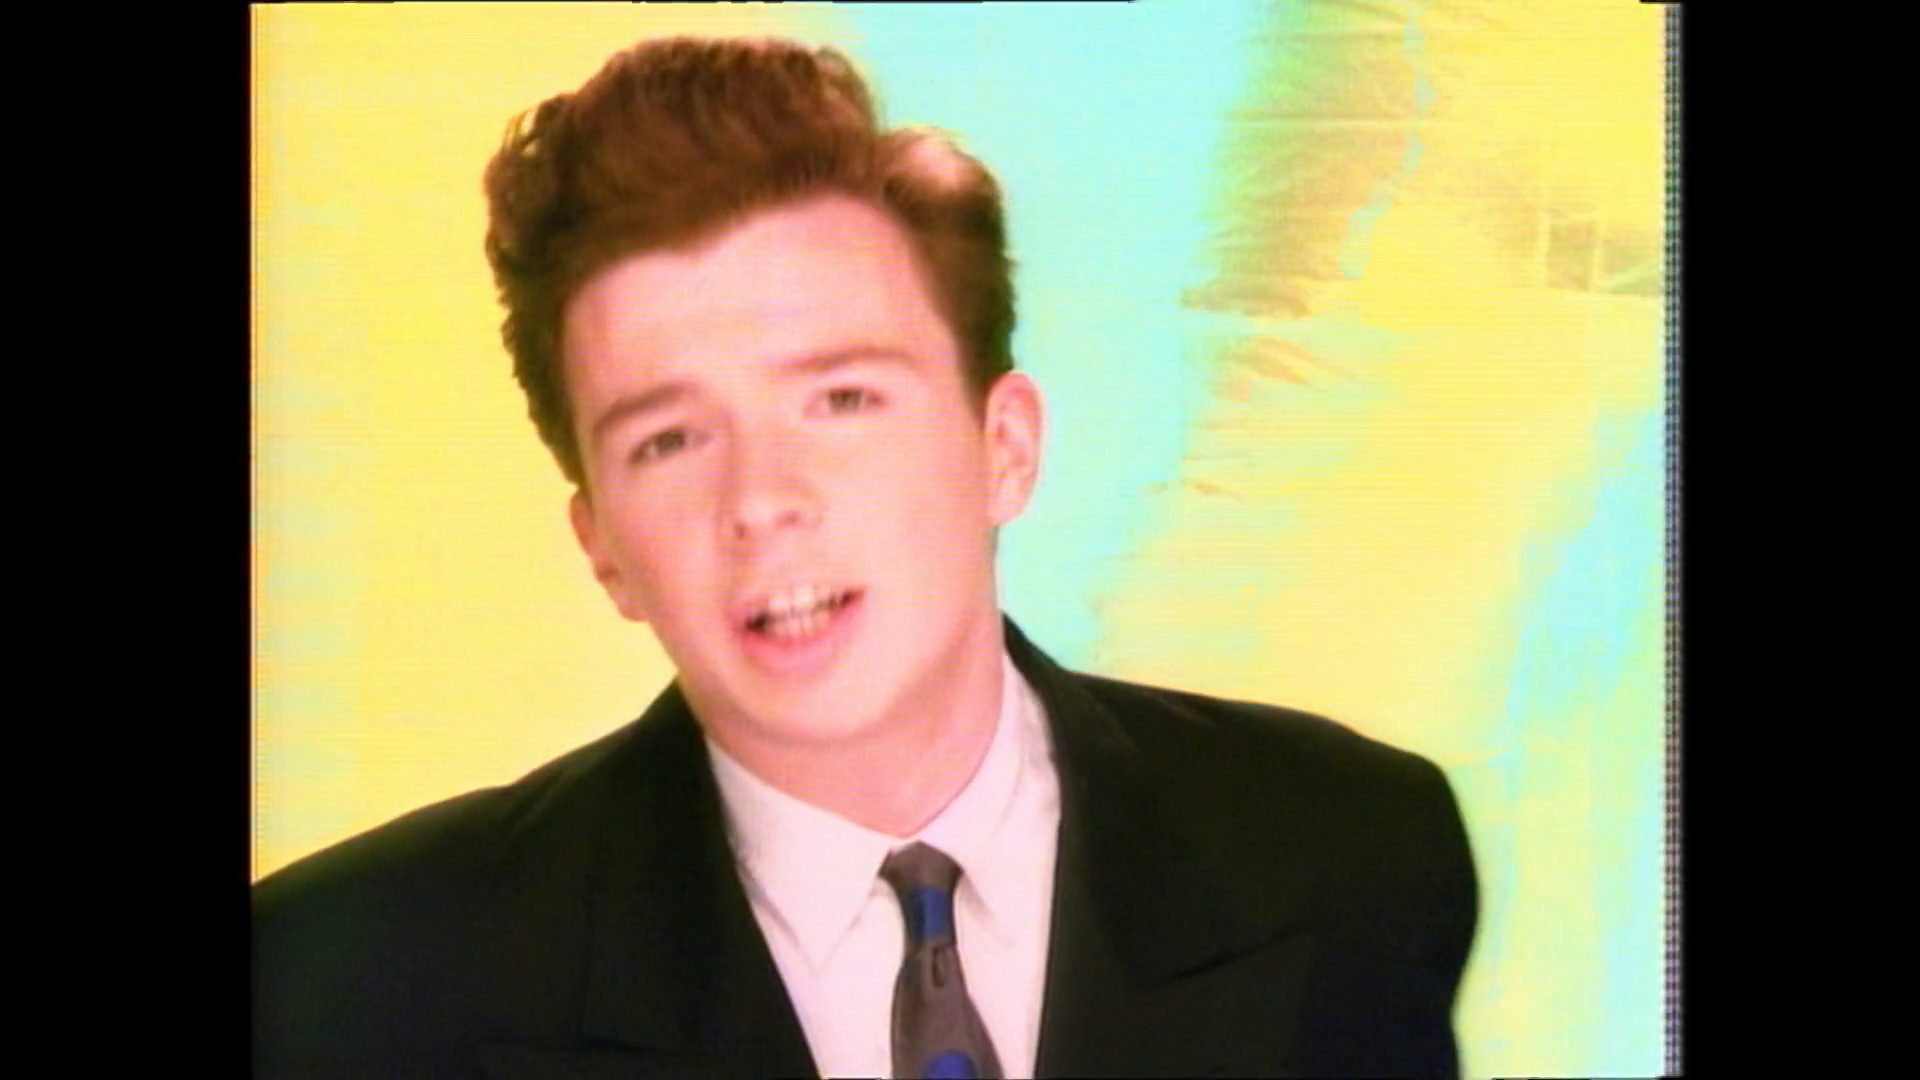 Together Forever / Rick Astley (A Breakers Clip) - Top of the Pops (February 25th, 1988)